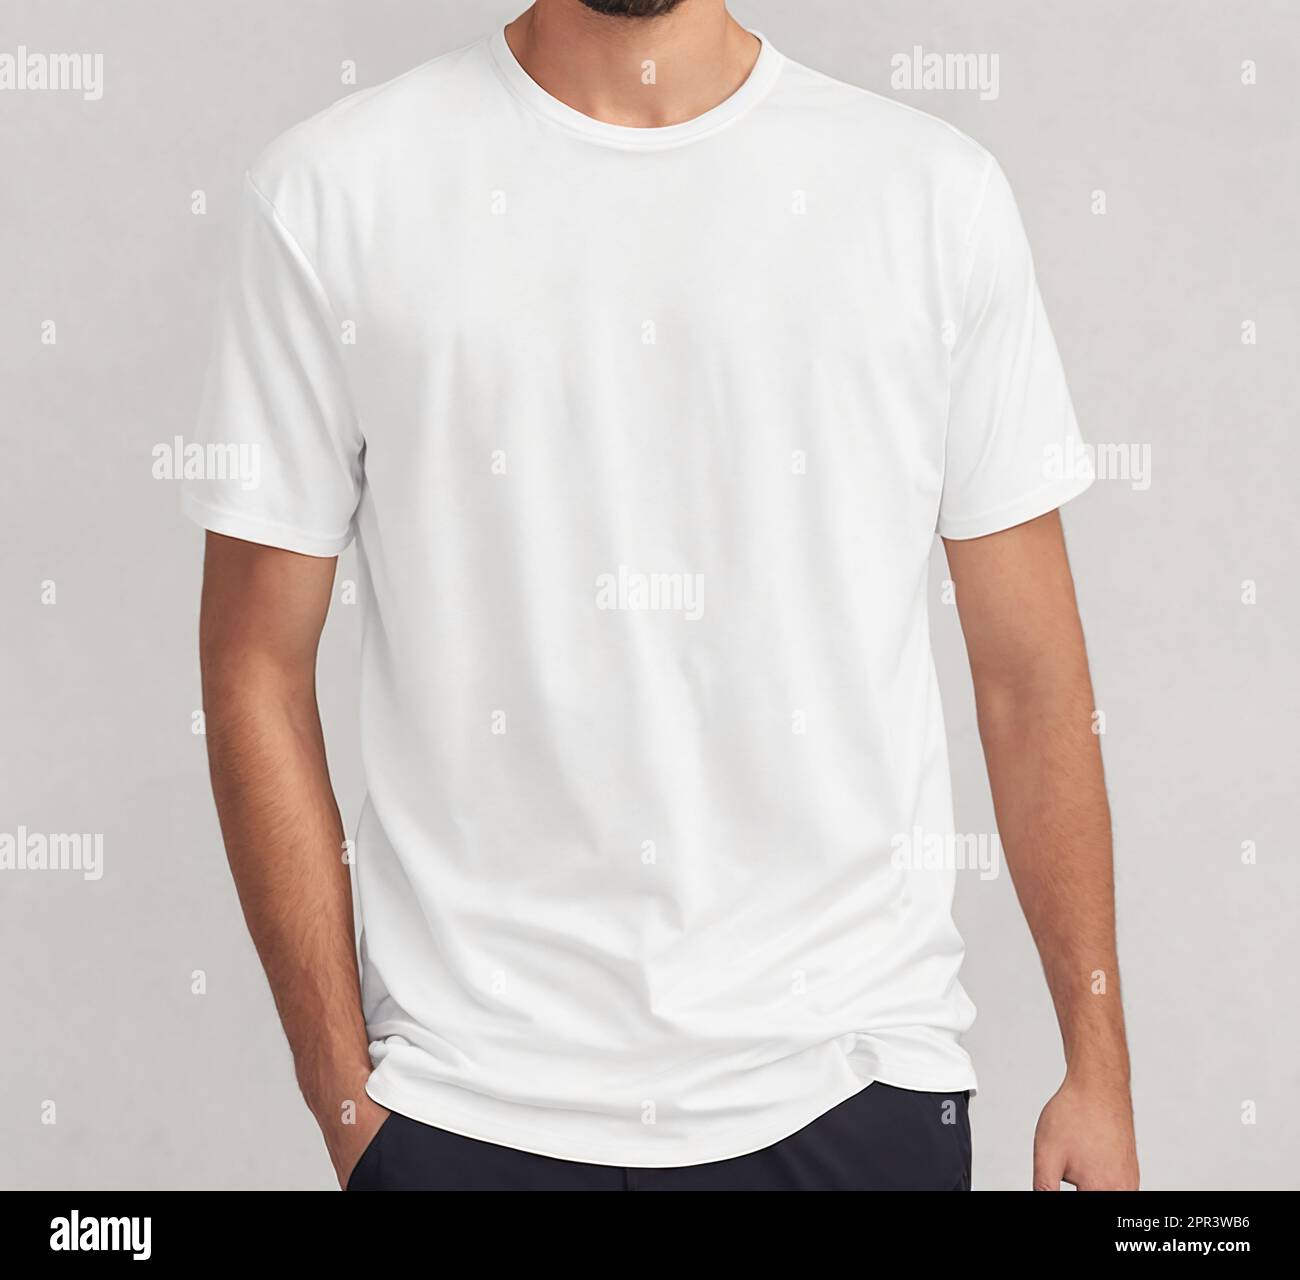 Young man wearing a white t-shirt on grey background. Template or mockup for clothing design Stock Photo